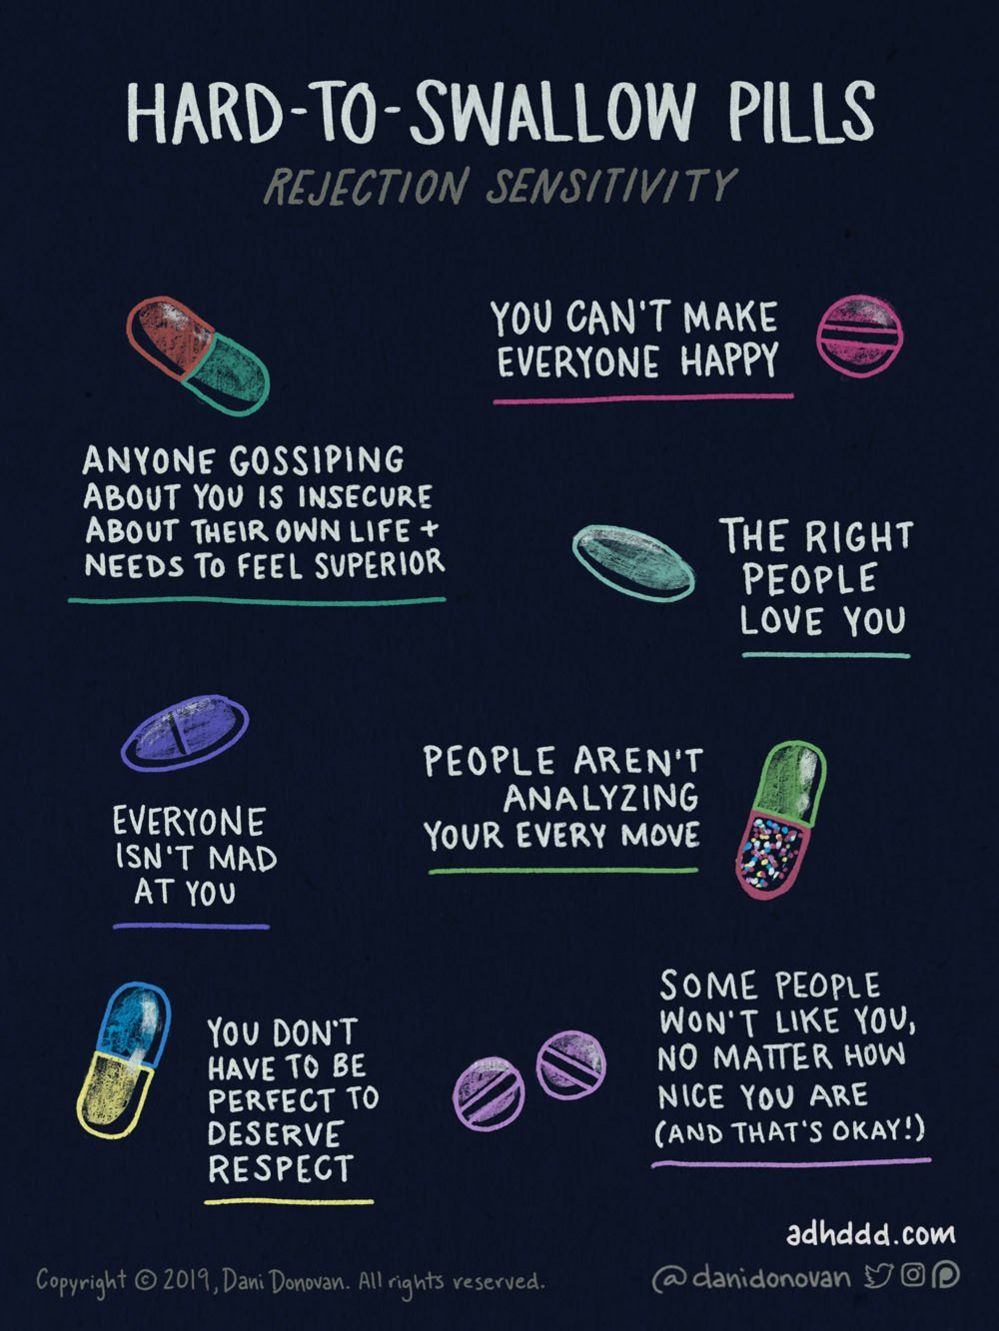 Graphic entitled 'Hard to Swallow Pills' and a sub-heading of 'rejection sensitivity'. One pink pill for 'You can't make everyone happy'; a red and green capsule for 'Anyone gossiping about you is insecure about their own life and needs to feel superior'; a green pill for 'The right people love you'; a blue pill for 'Everyone isn't mad at you'; a green and dotted pill for 'People aren't analyzing your every move'; a blue and yellow pill for 'You don't have to be perfect to deserve respect' and two purple pills for 'Some people won't like you, no matter how nice you are (and that's okay!).